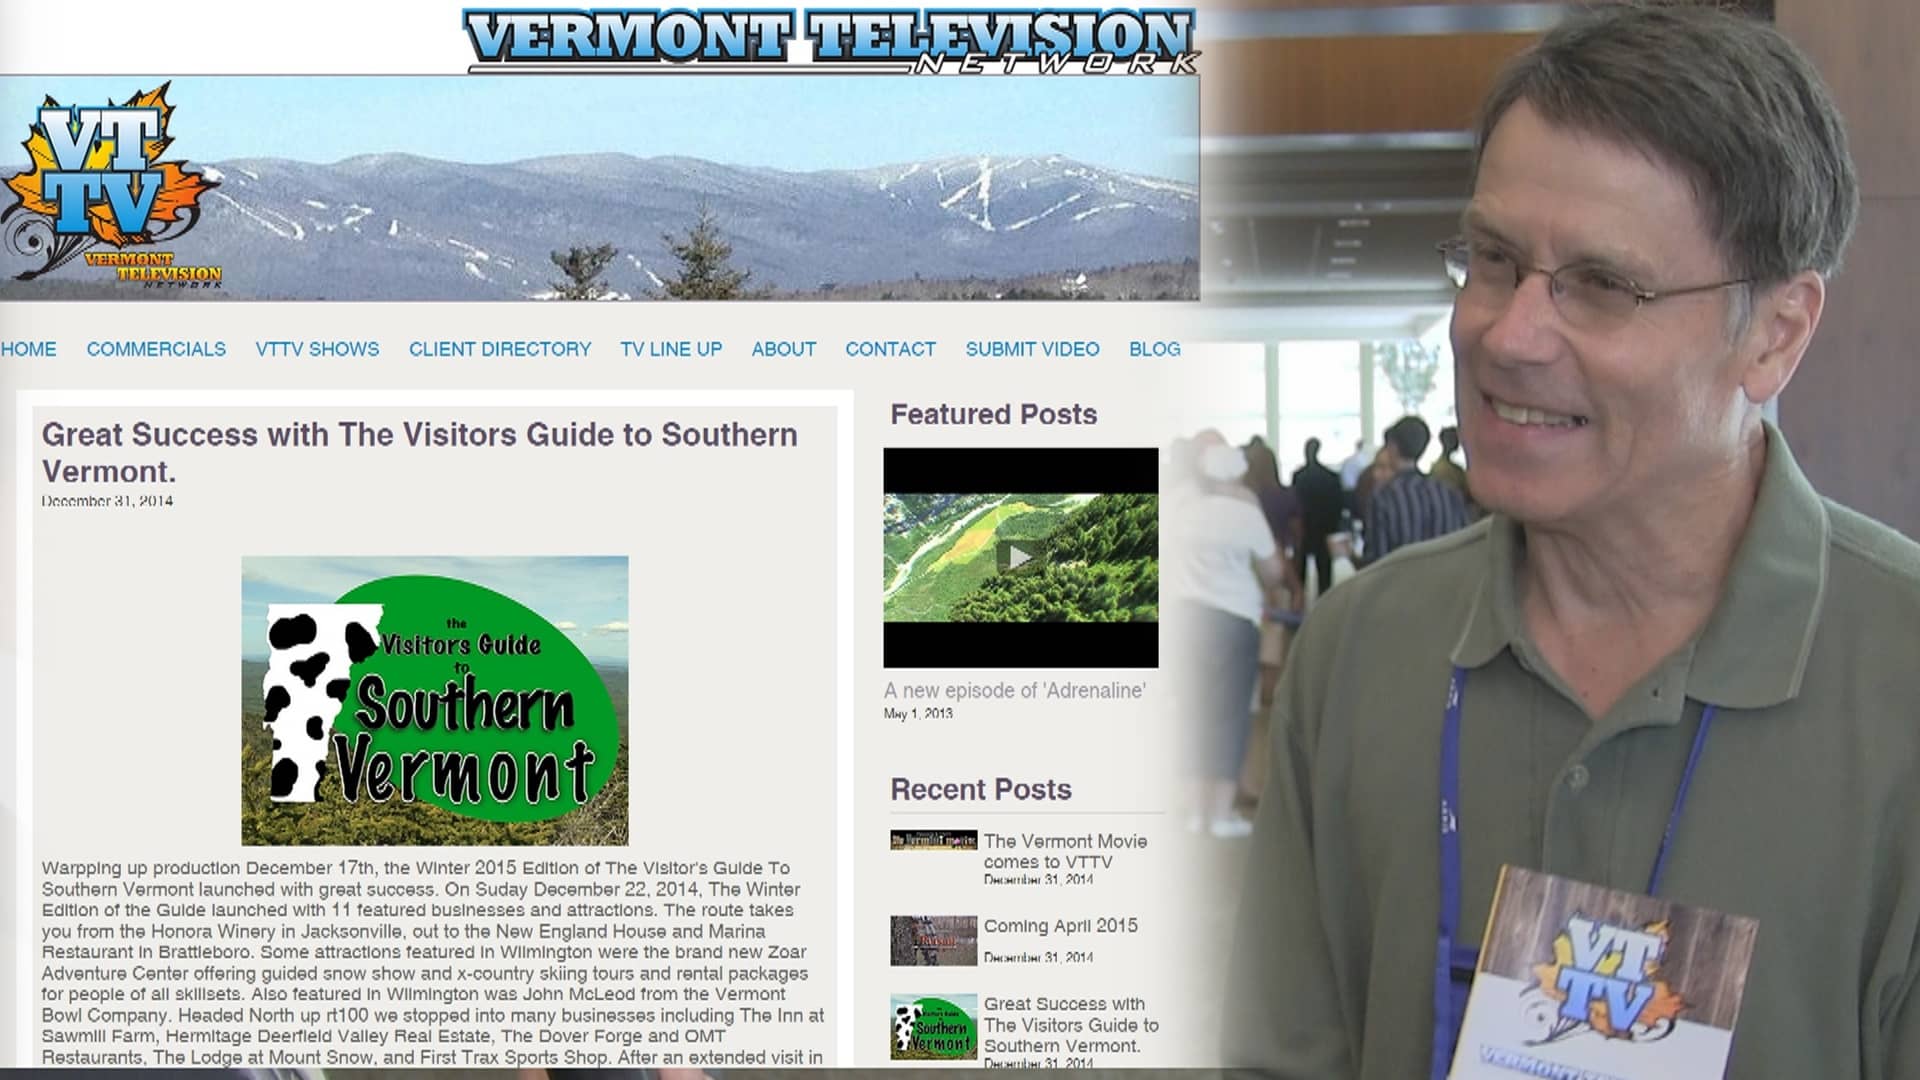 Cliff Duncan discusses Vermont Television at the 2015 The Independent Show.